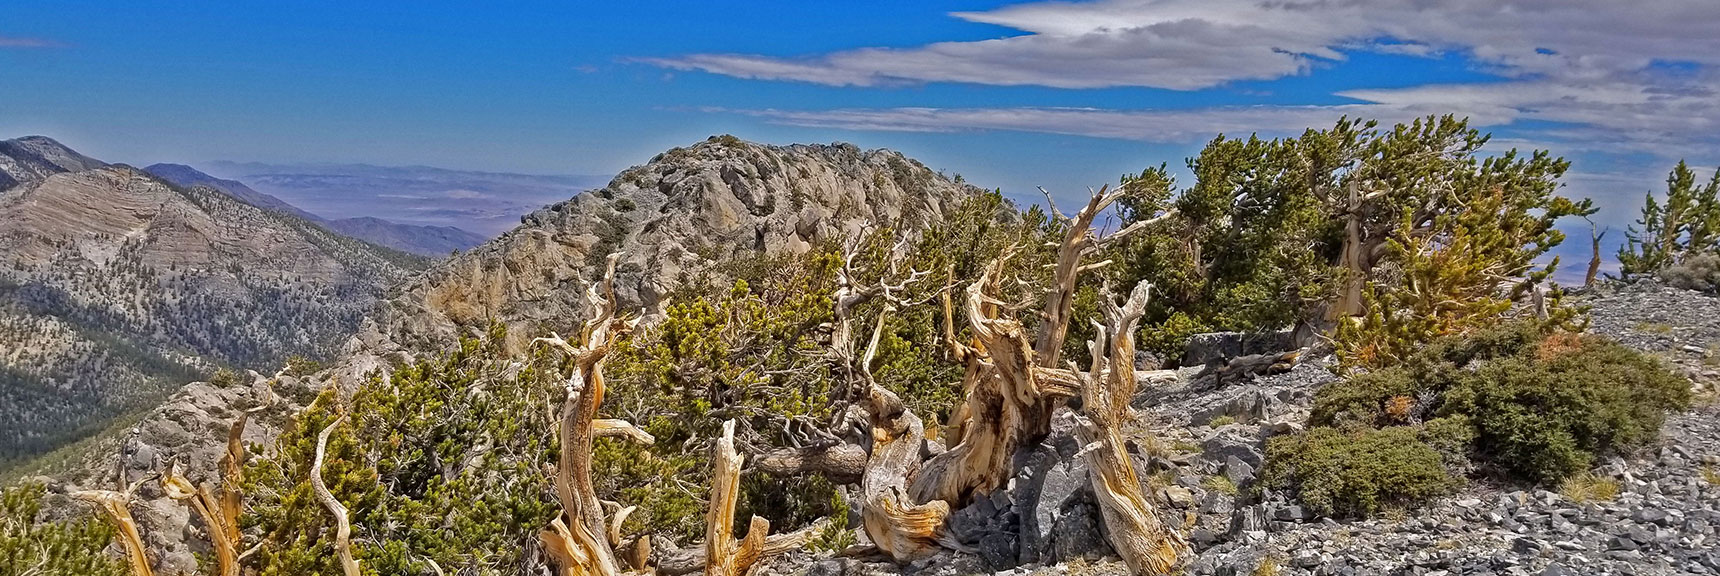 Western Summit of The Sisters South Viewed from the Eastern Summit. | The Sisters South | Lee Canyon | Mt Charleston Wilderness | Spring Mountains, Nevada